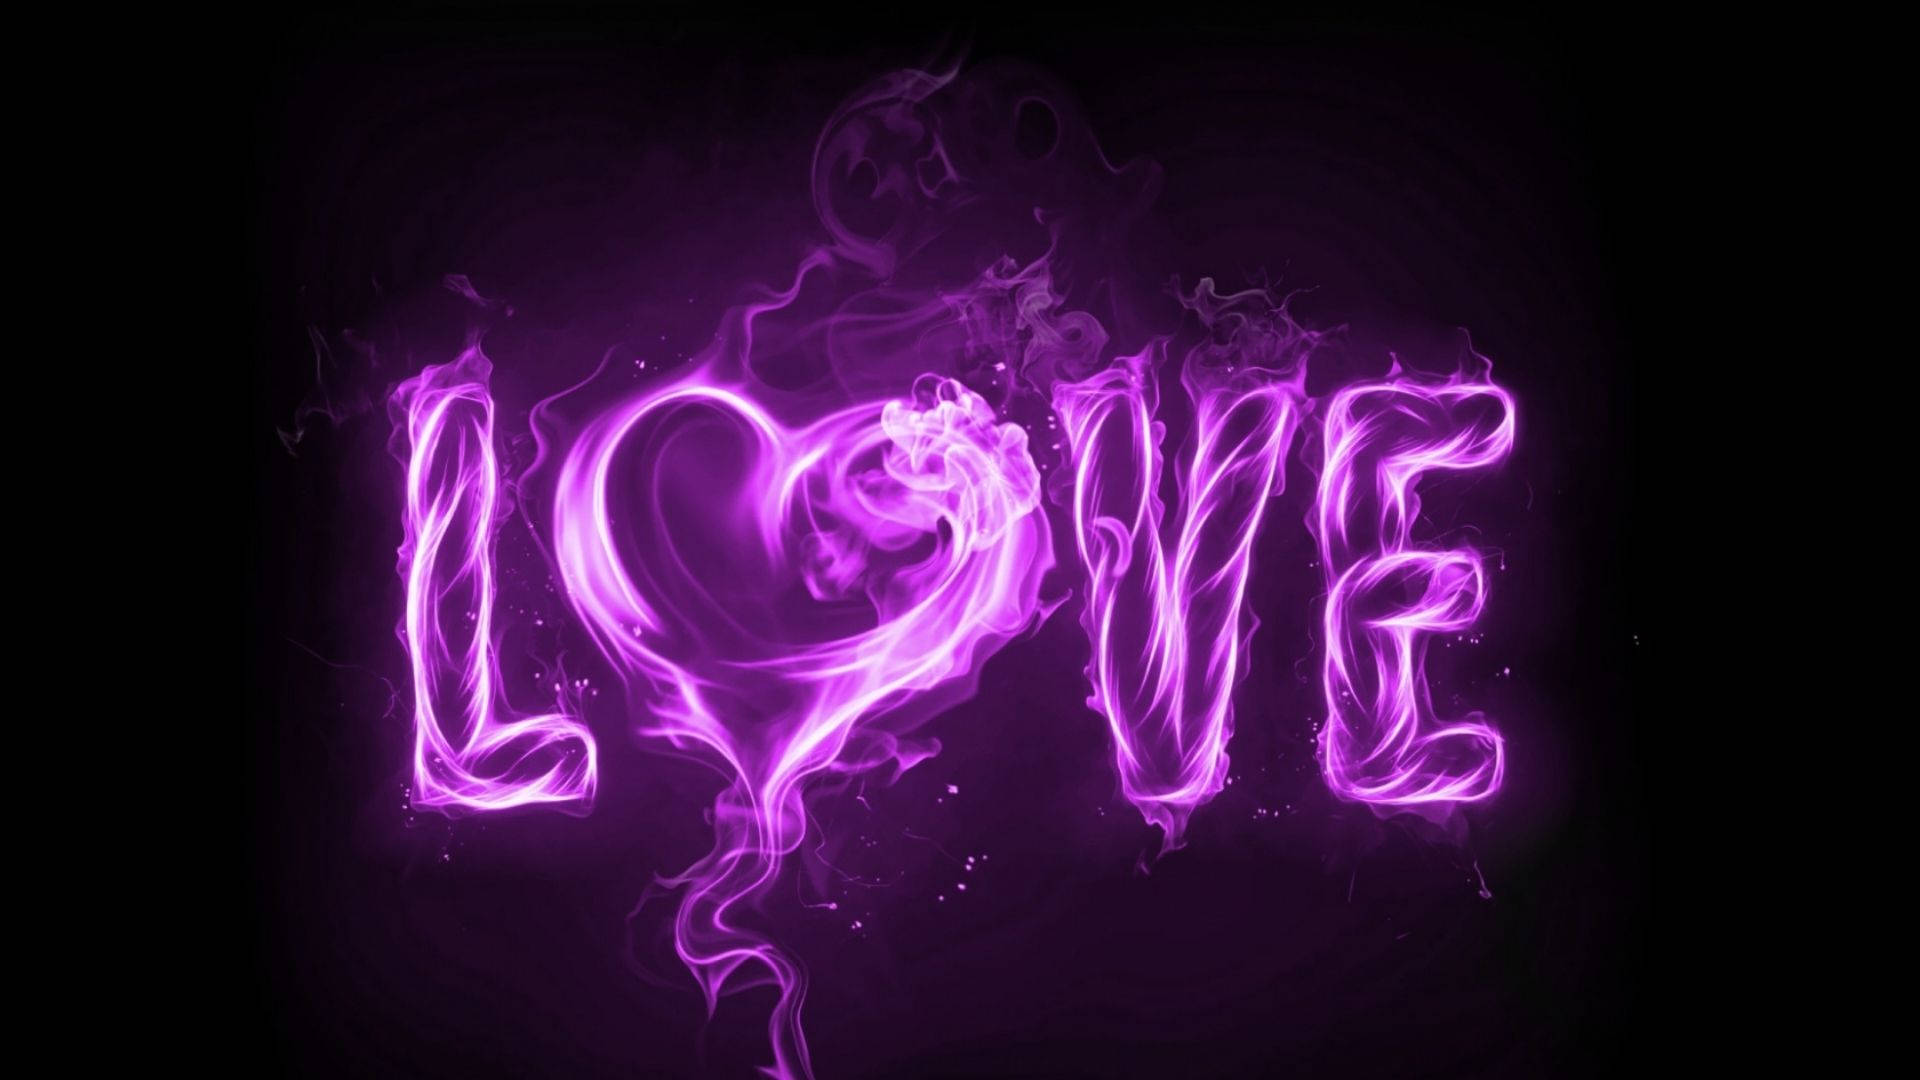 Free Hearts Wallpaper Downloads, [500+] Hearts Wallpapers for FREE |  